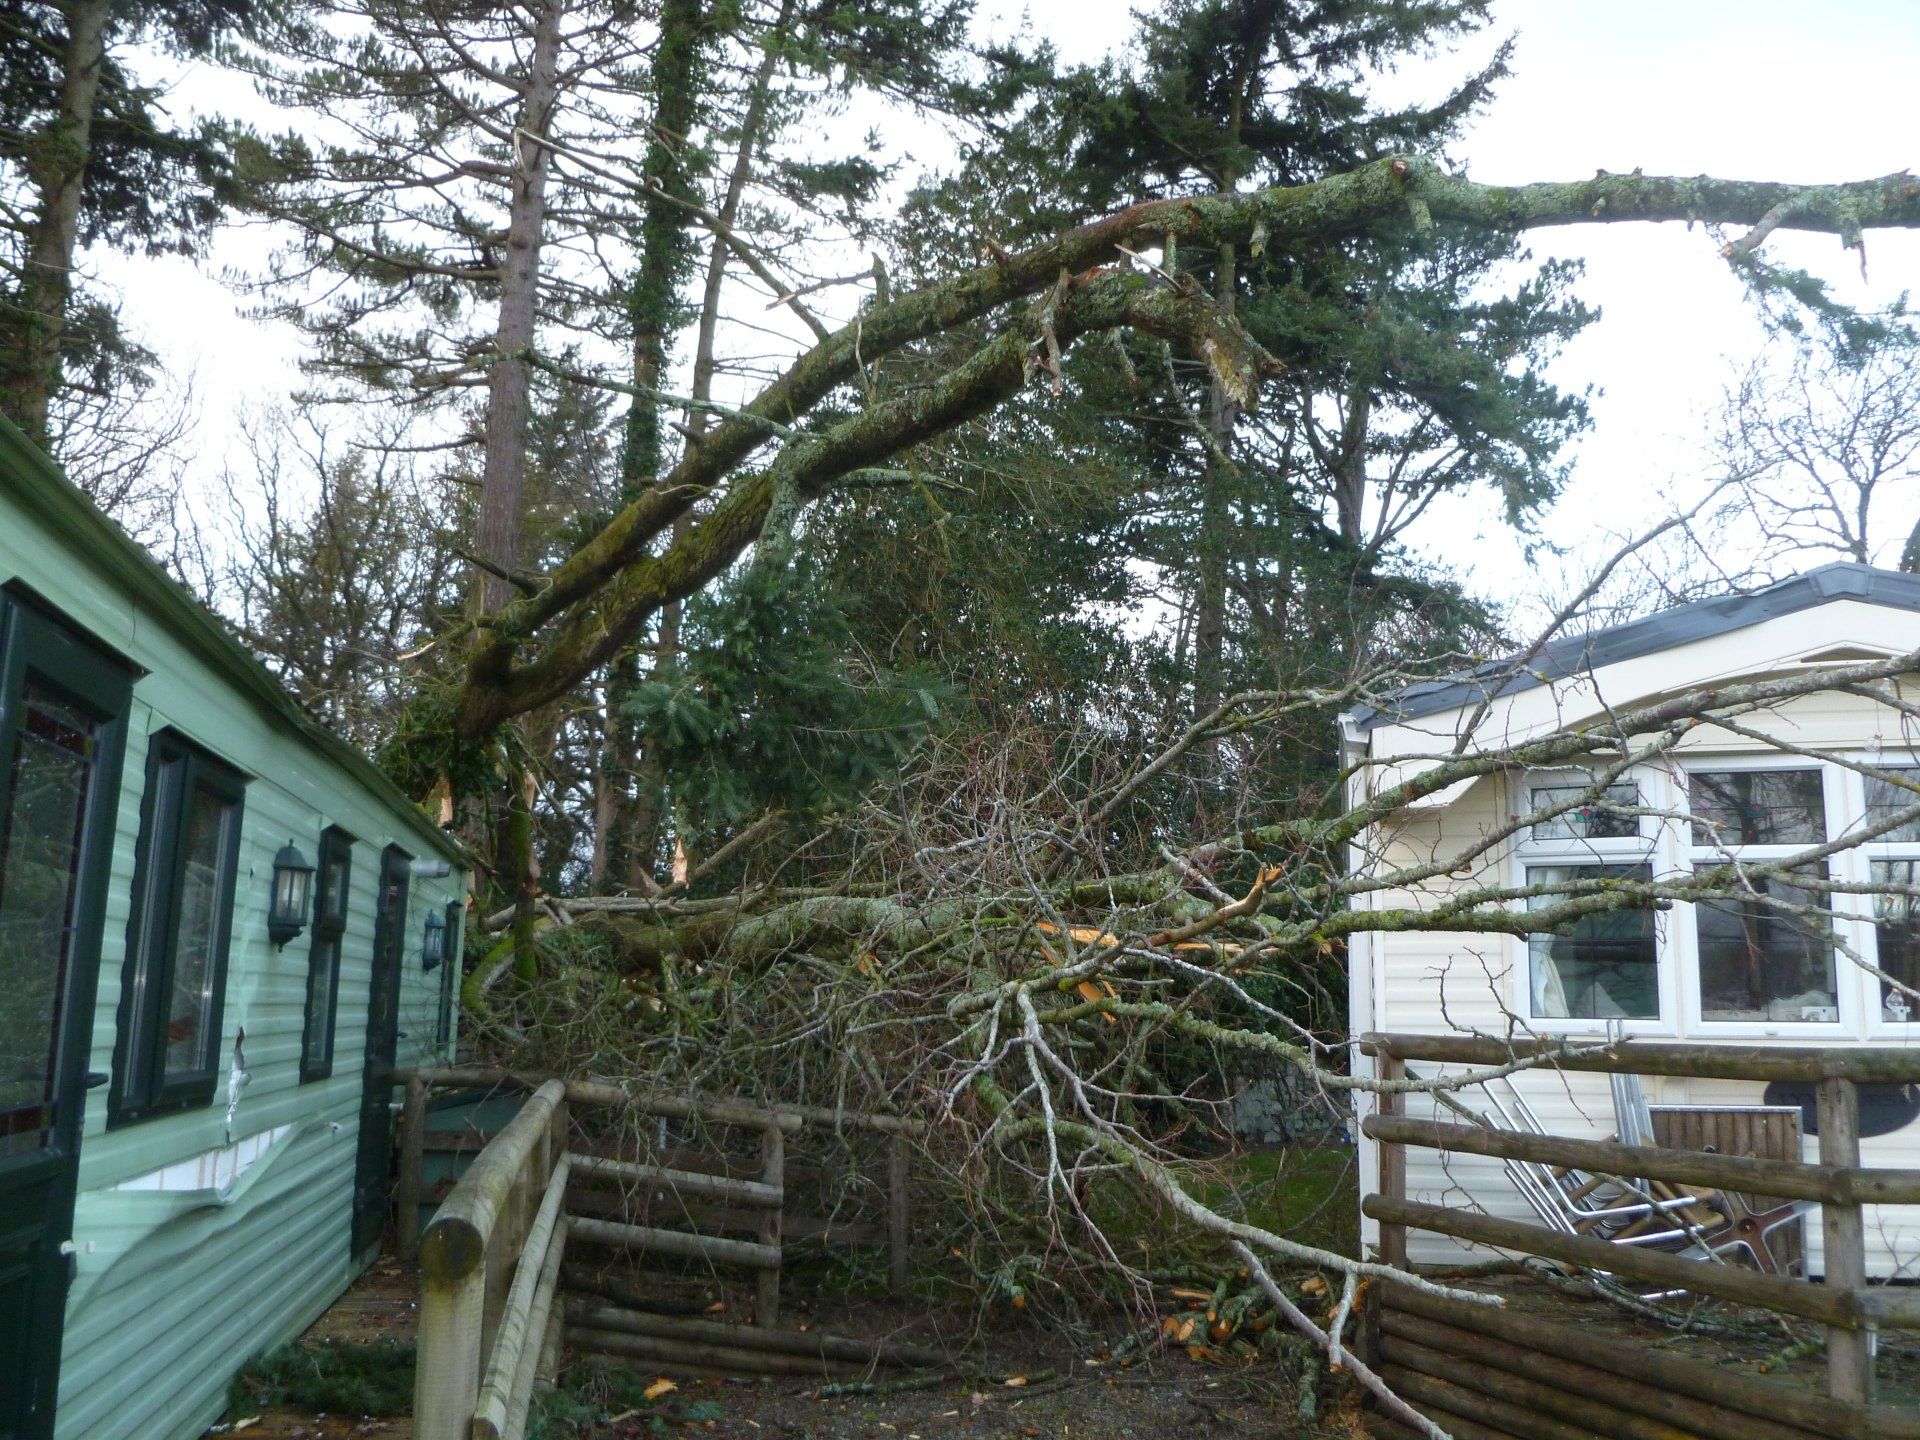 Removint the Ash and Pine tree without causing any further damage.